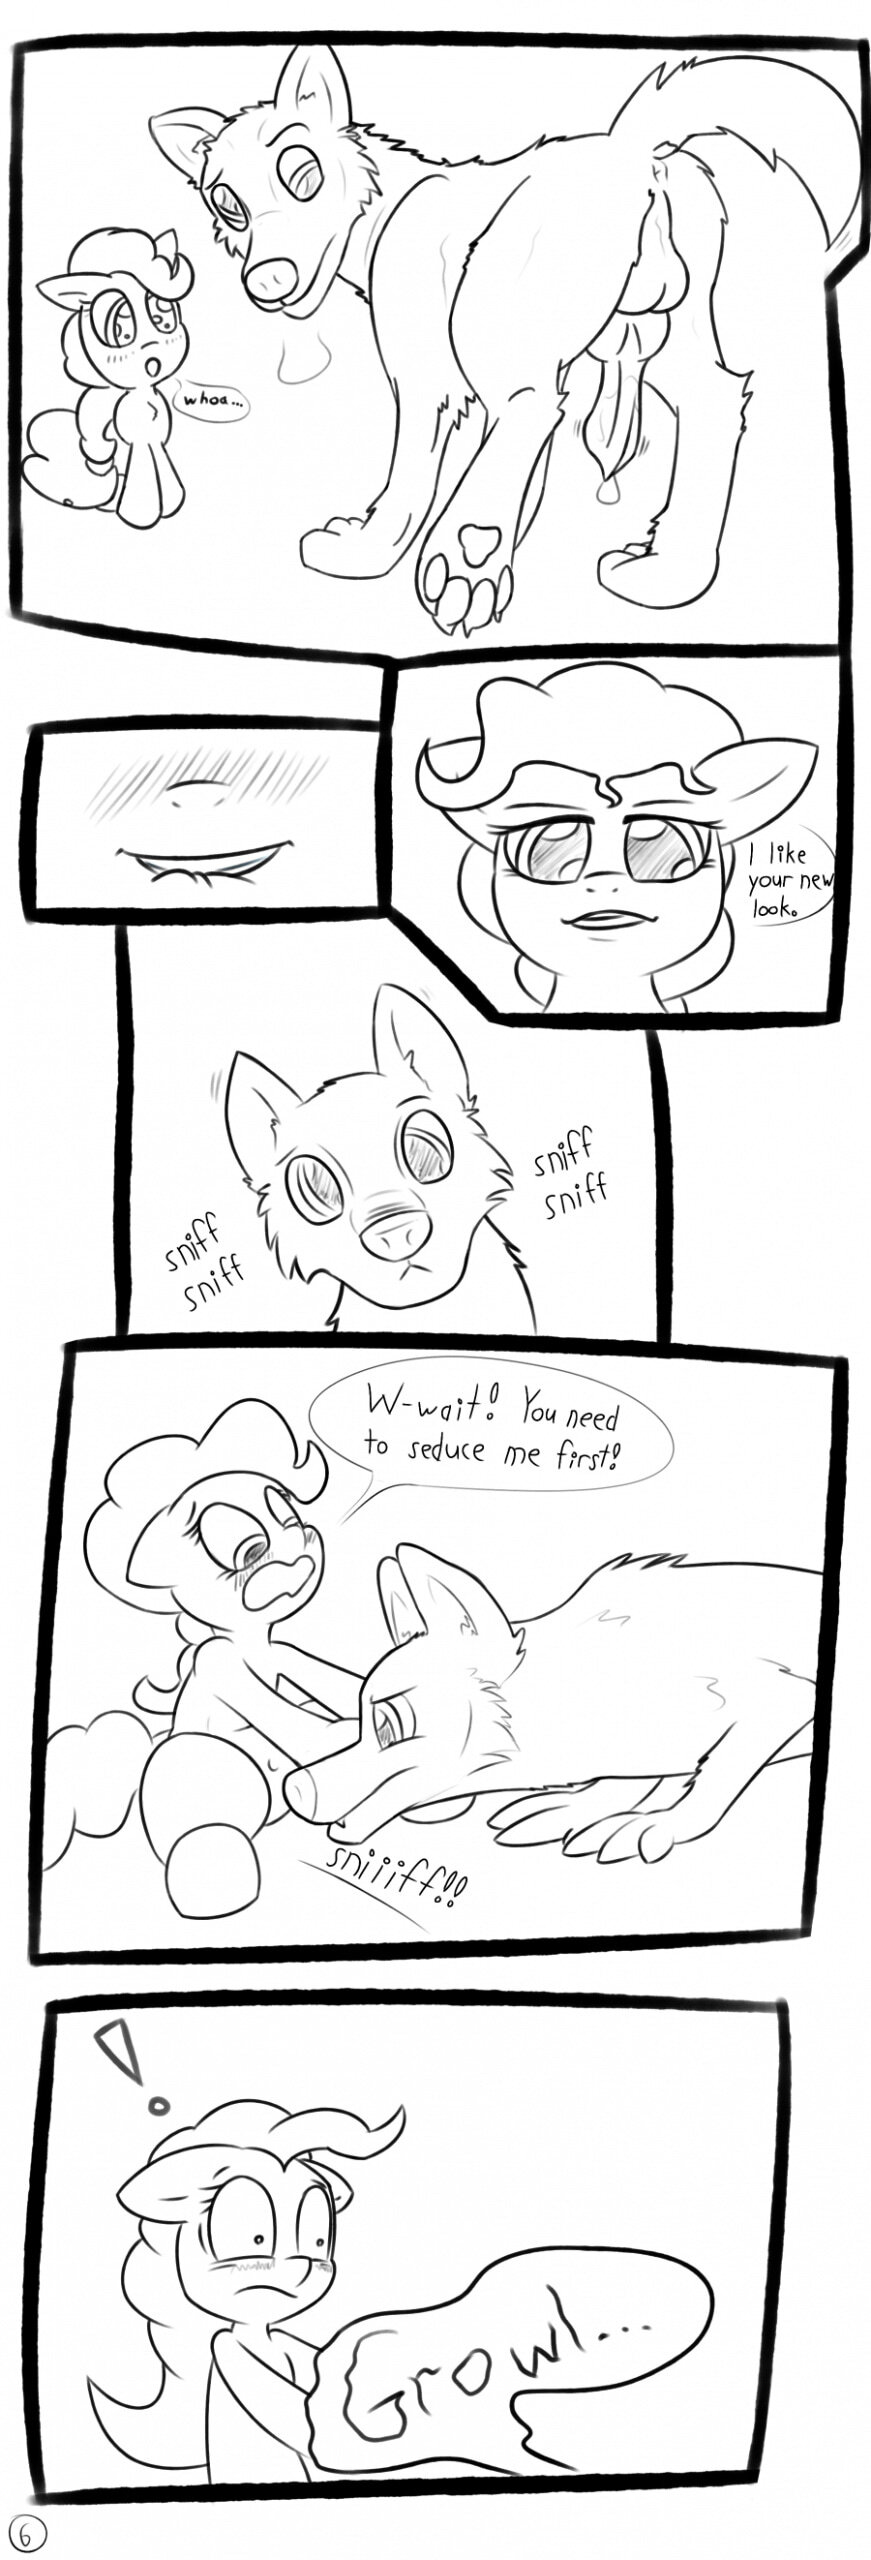 Twilight's Book of Transmogrification Chapter 1: Day of the Dog - Page 7